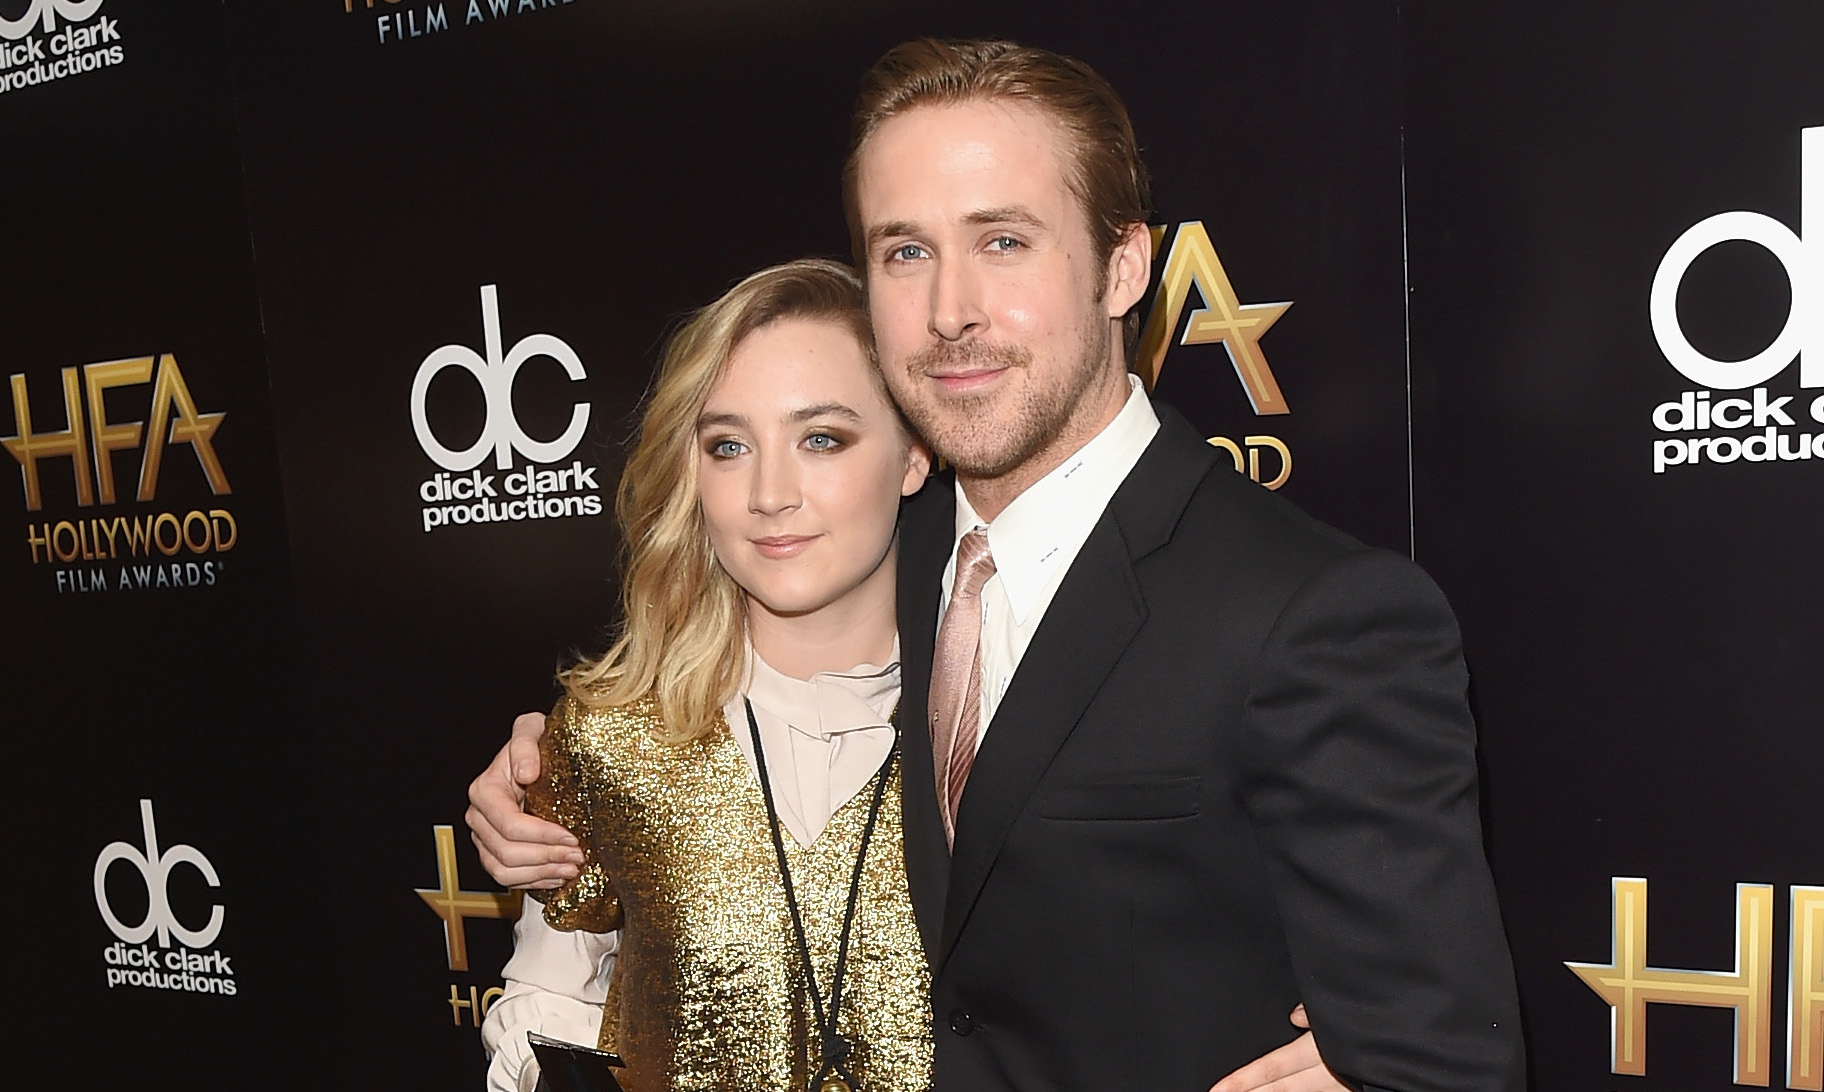 BEVERLY HILLS, CA - NOVEMBER 01: Actors Saoirse Ronan (L), winner of the New Hollywood Award for 'Brooklyn', and Ryan Gosling pose in the press room during the 19th Annual Hollywood Film Awards at The Beverly Hilton Hotel on November 1, 2015 in Beverly Hills, California. (Photo by Jason Merritt/Getty Images)